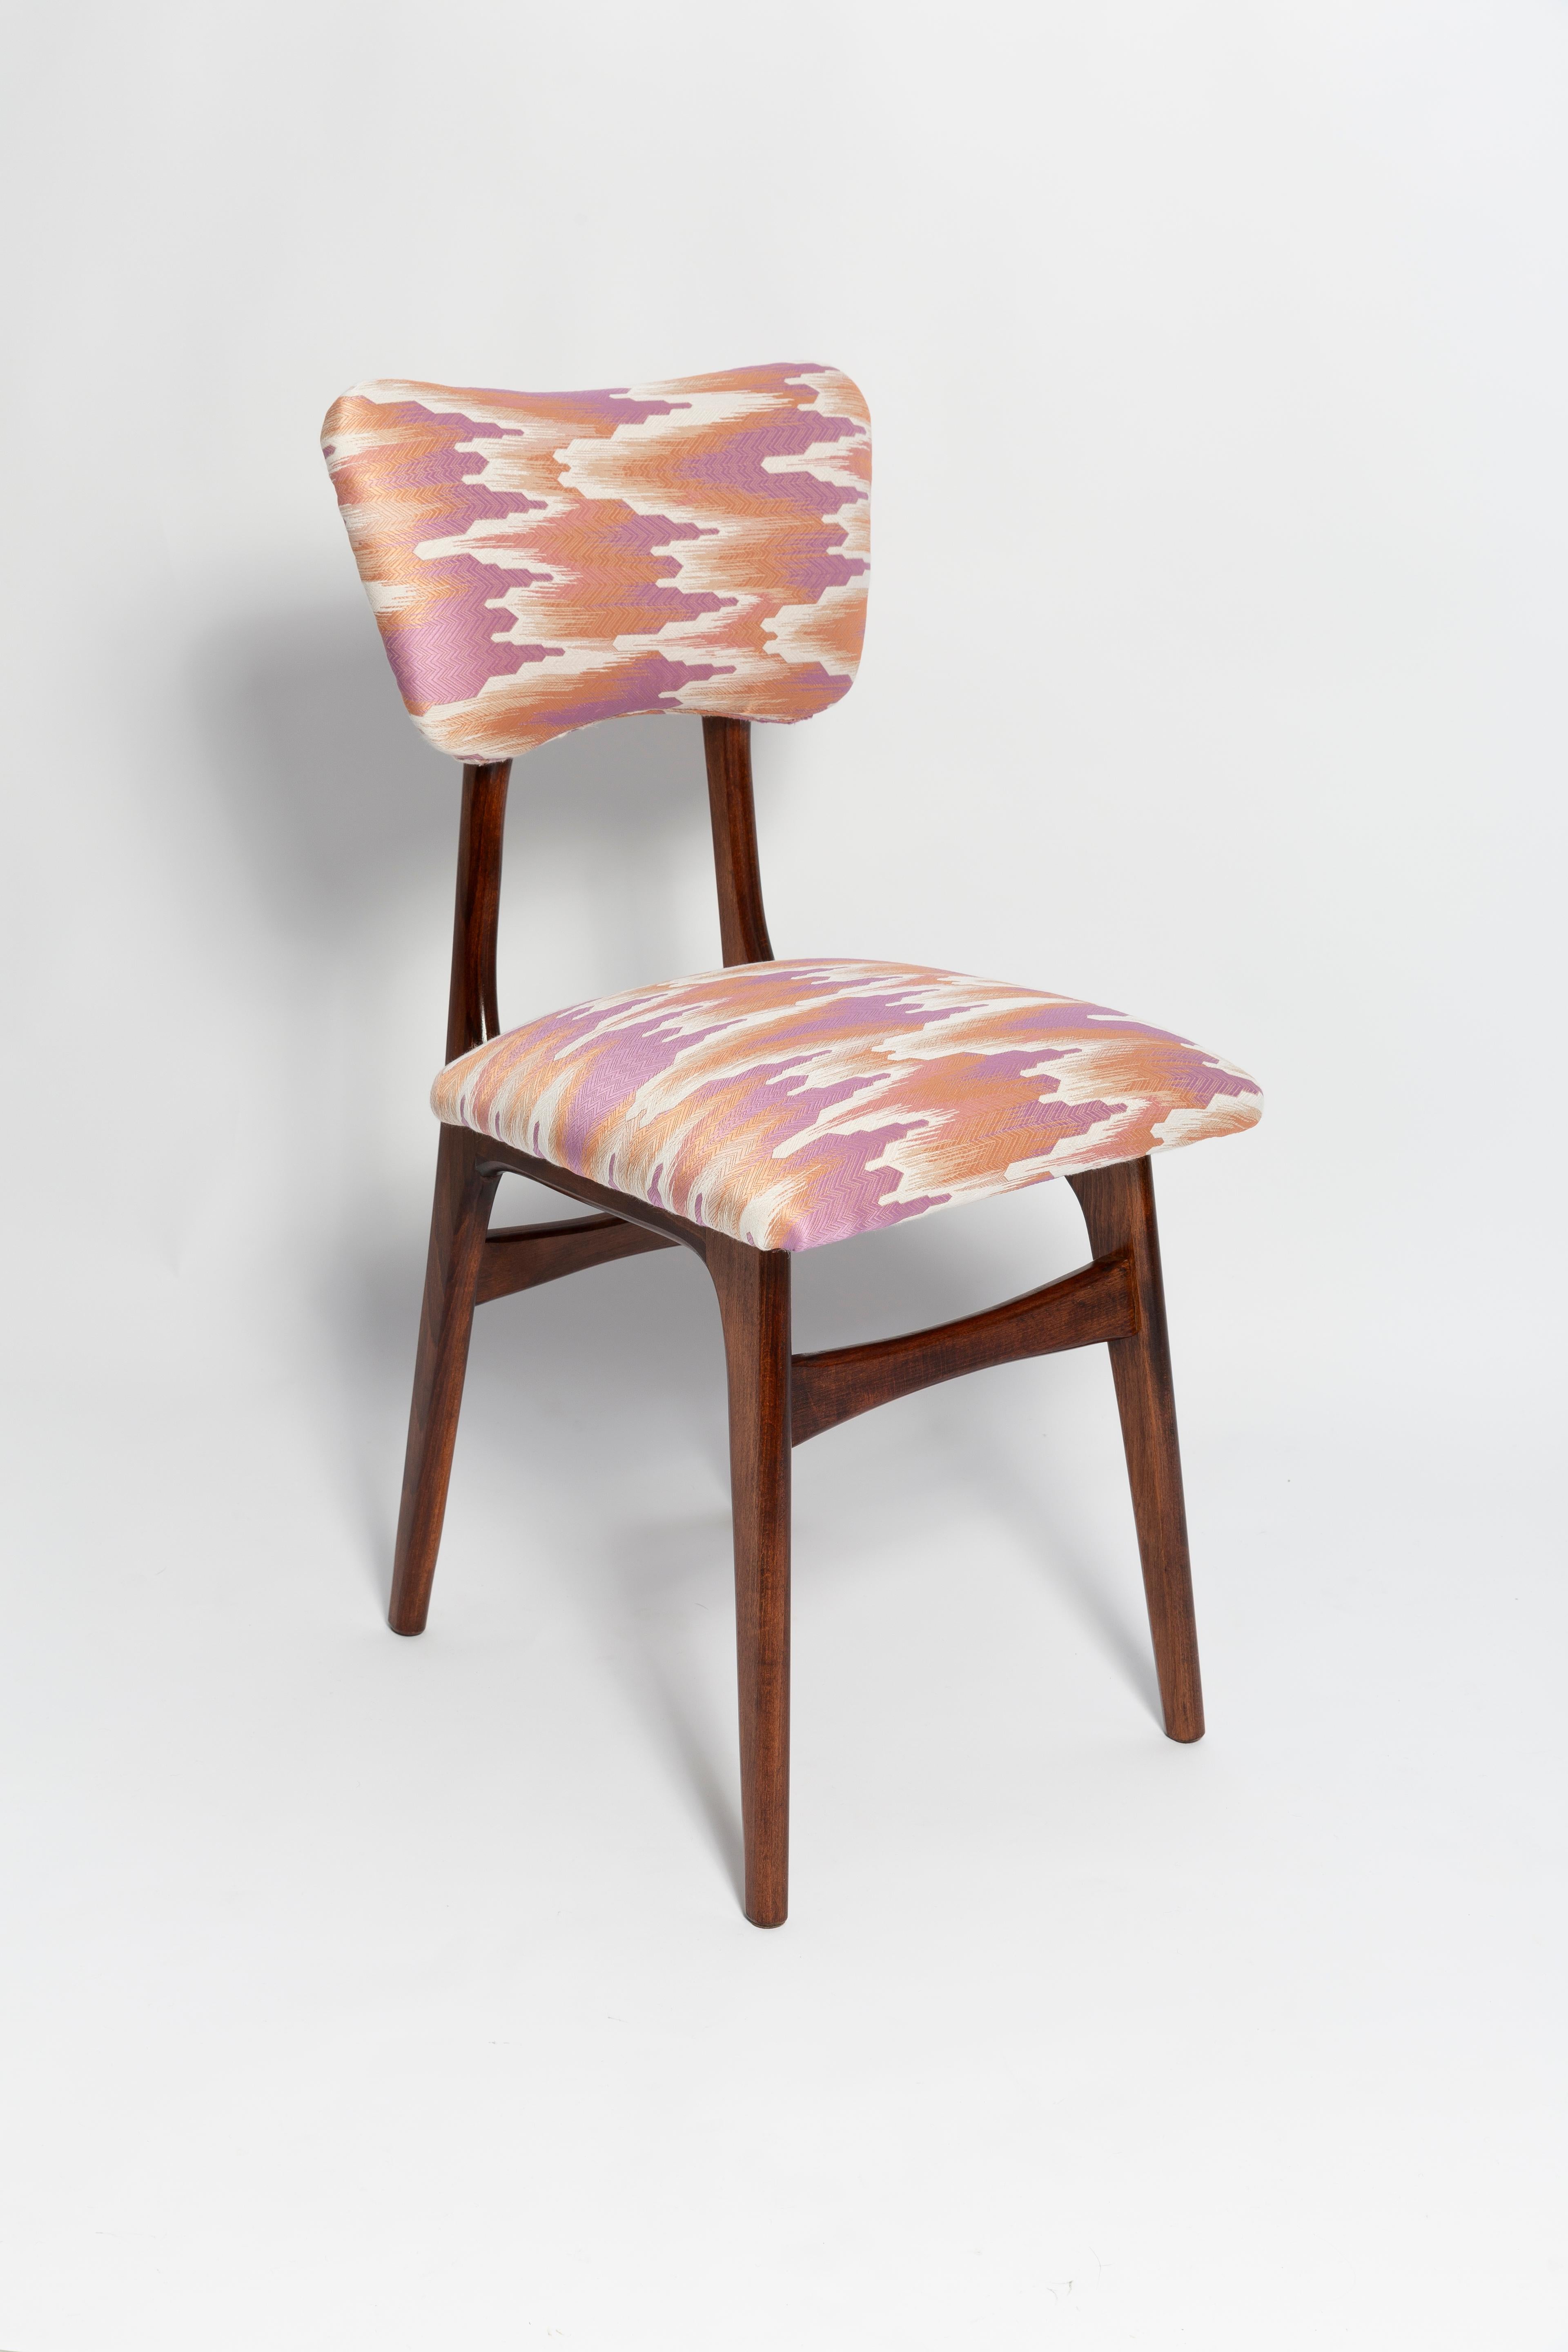 Hand-Crafted Mid Century Butterfly Chair and Stool Fandango Jacquard, Dark Wood, Europe 1960s For Sale